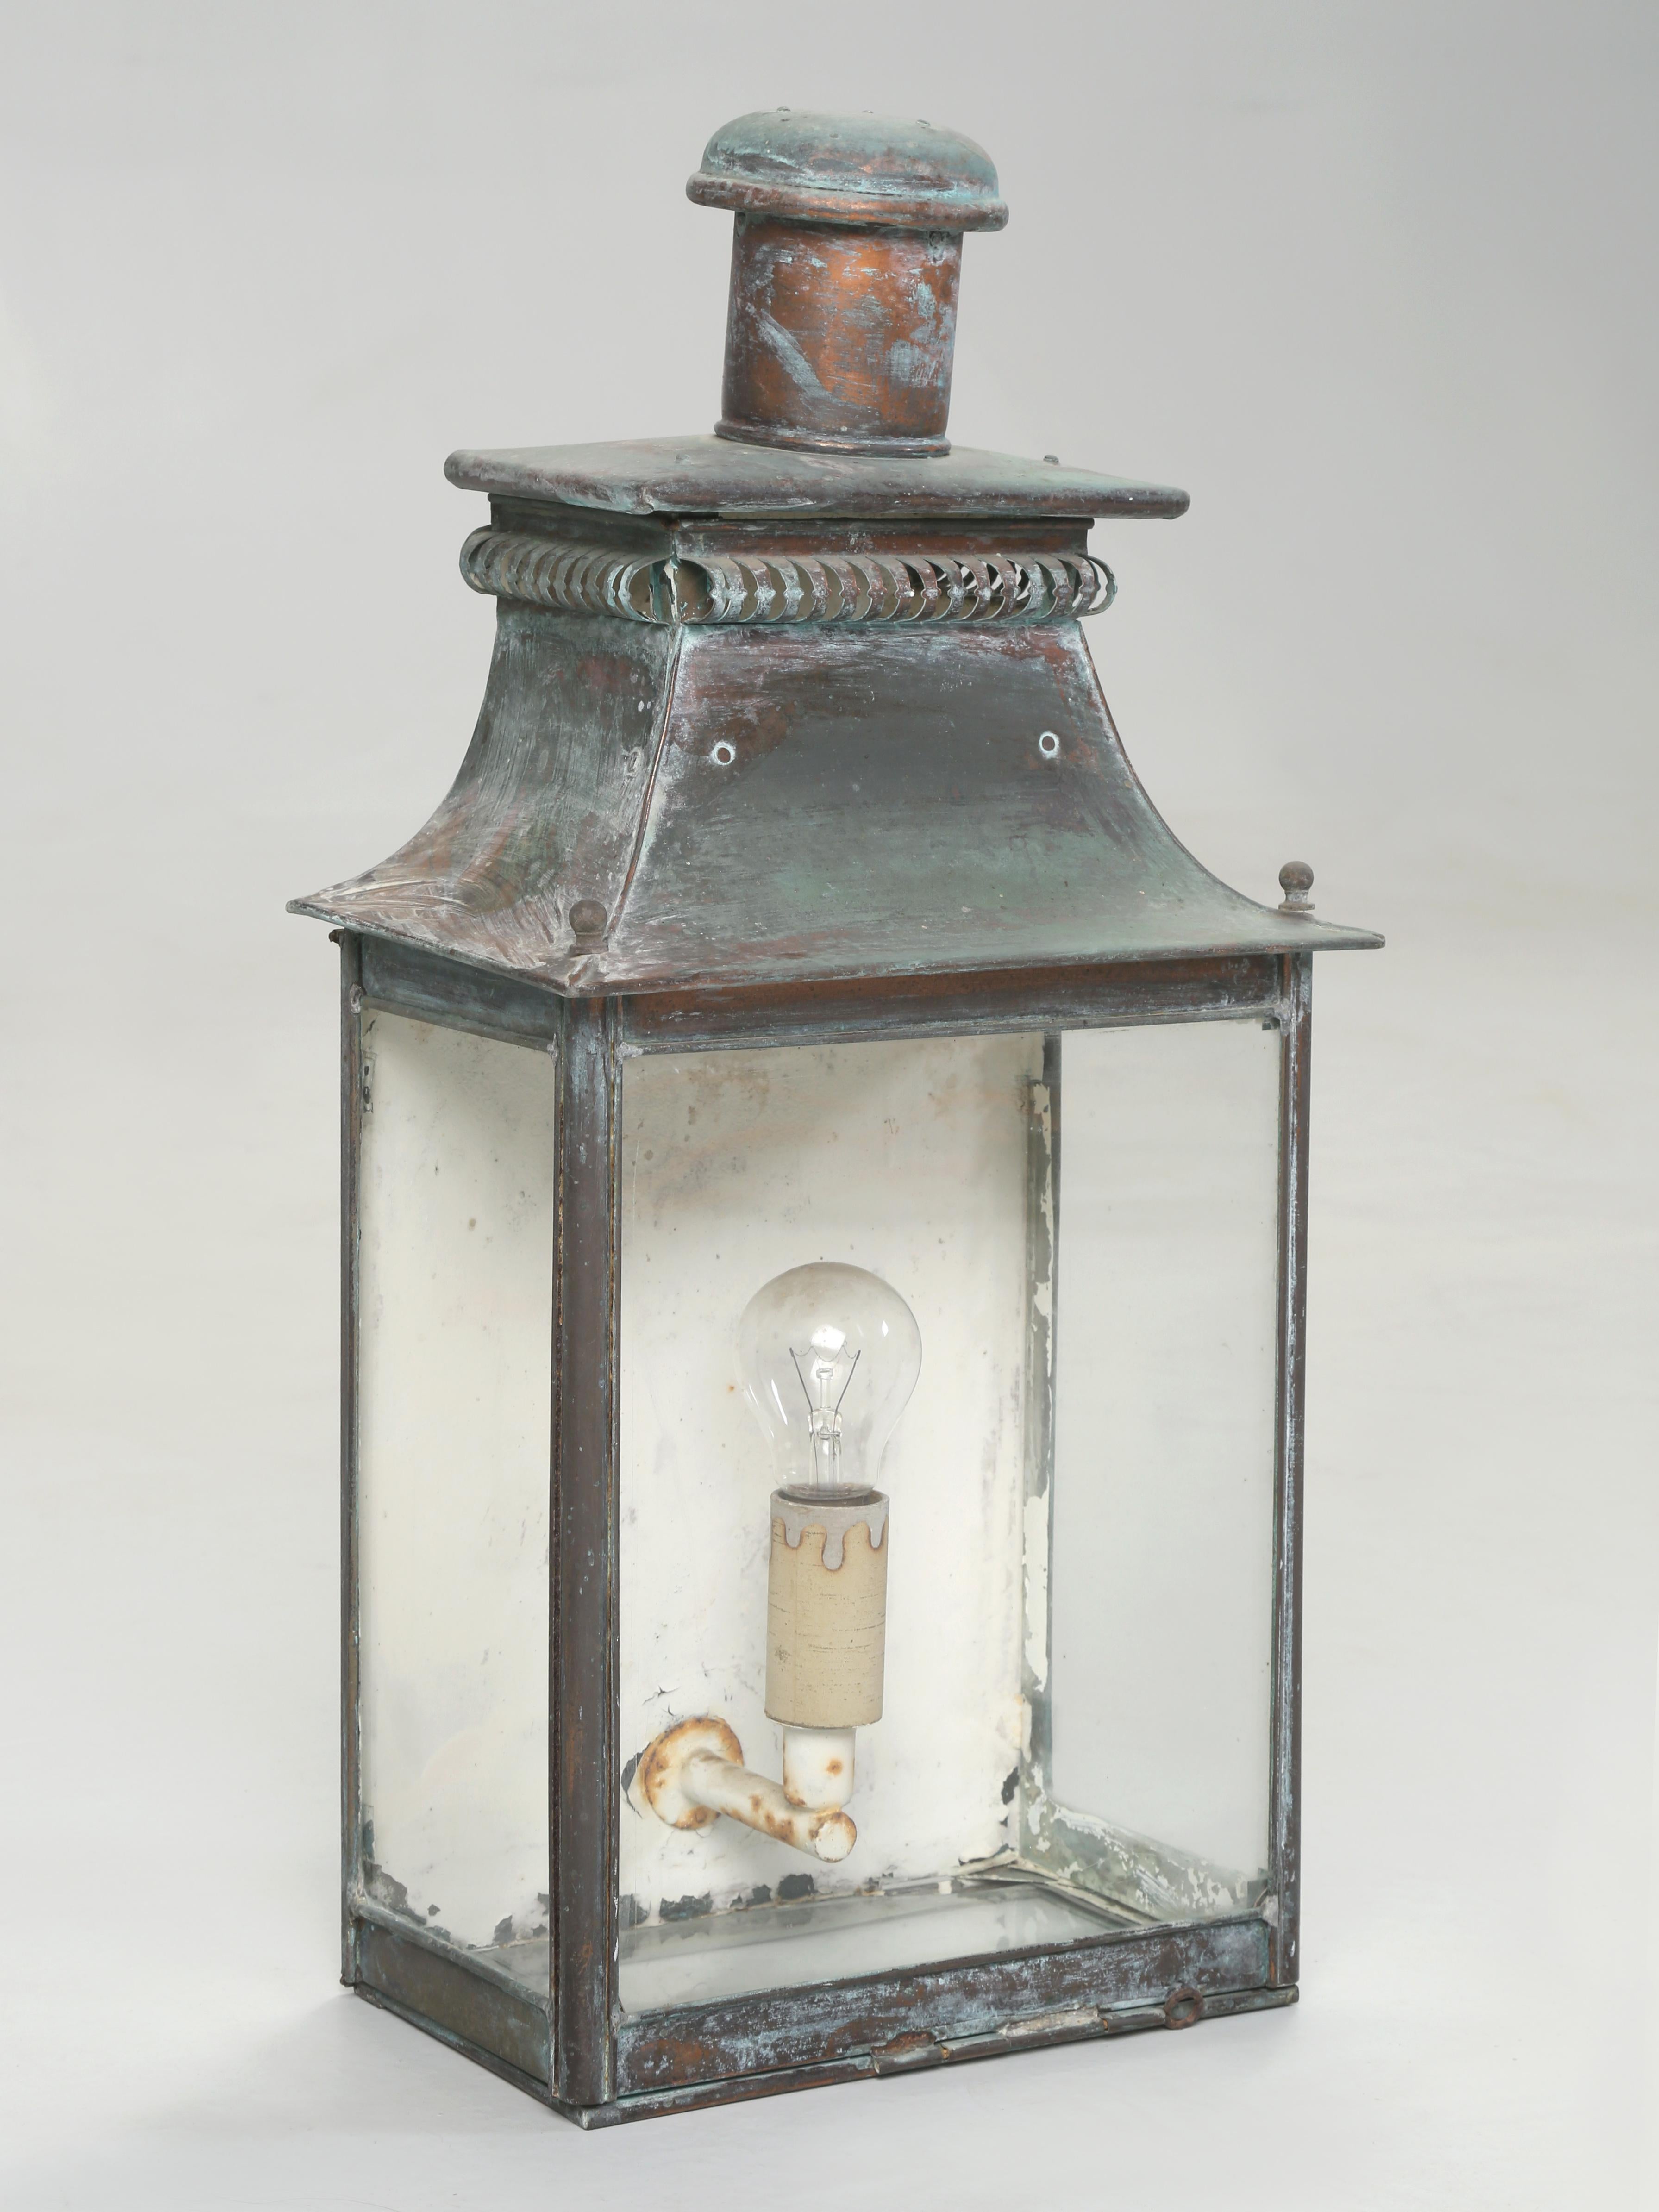 Antique French Wall Lantern with an incredible all Original Natural Patina. Made from Solid Copper and looks to be from the late 1800's or possibly the very early 1900's. We have left the Antique Copper Lantern in as found condition, for once they